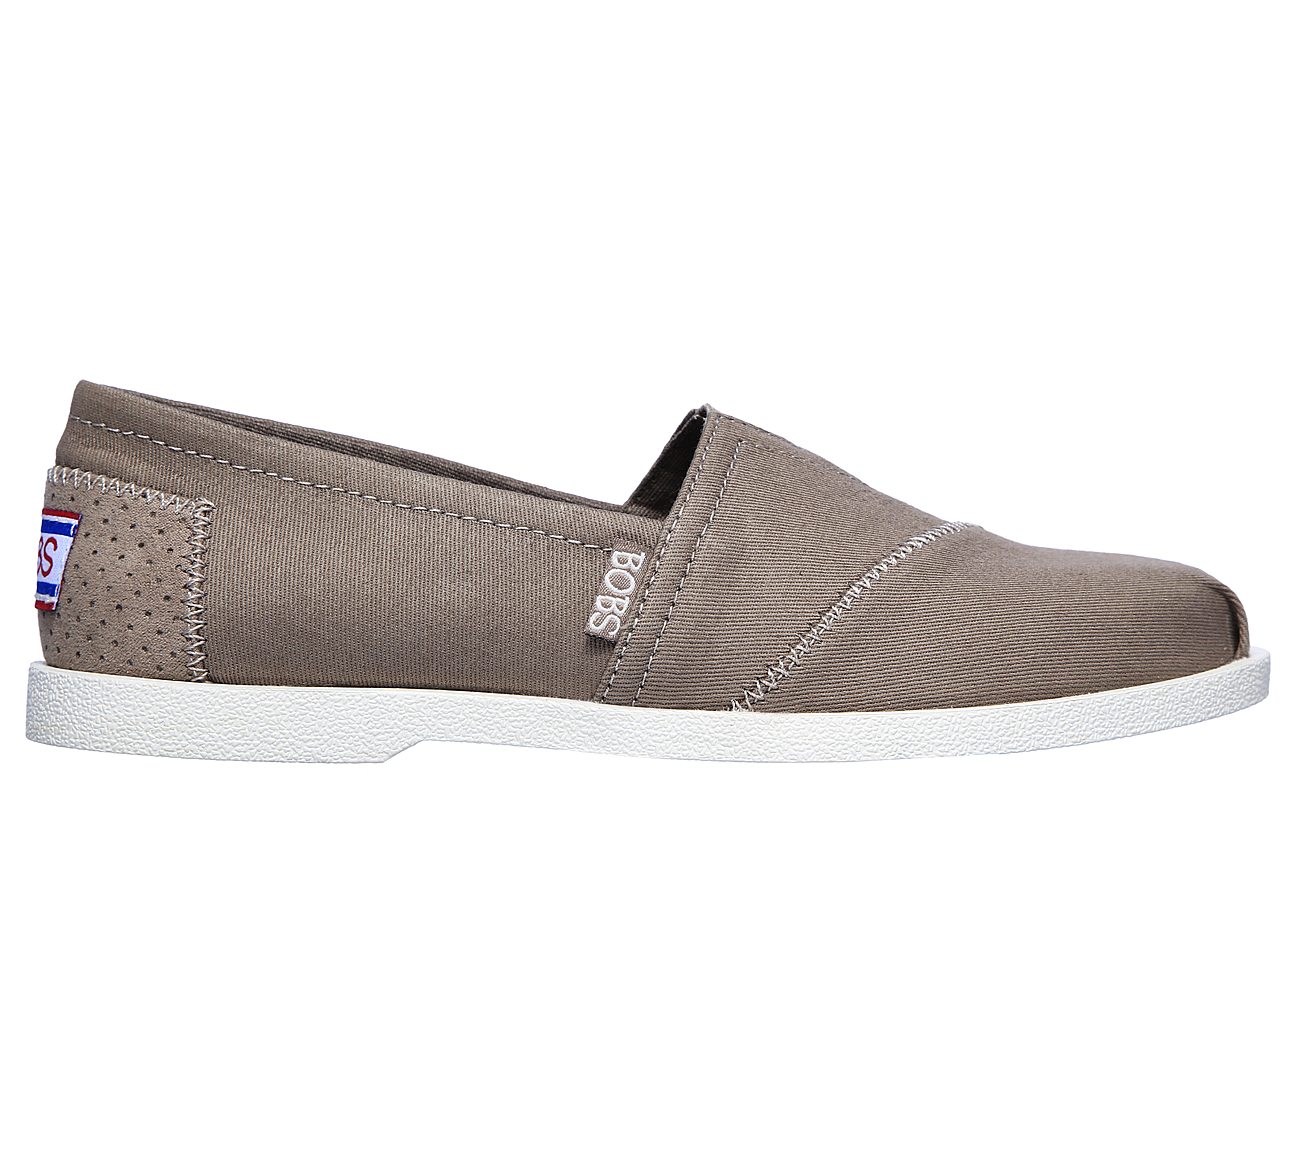 Buy SKECHERS BOBS Chill Luxe - Sierra Sundays BOBS Shoes